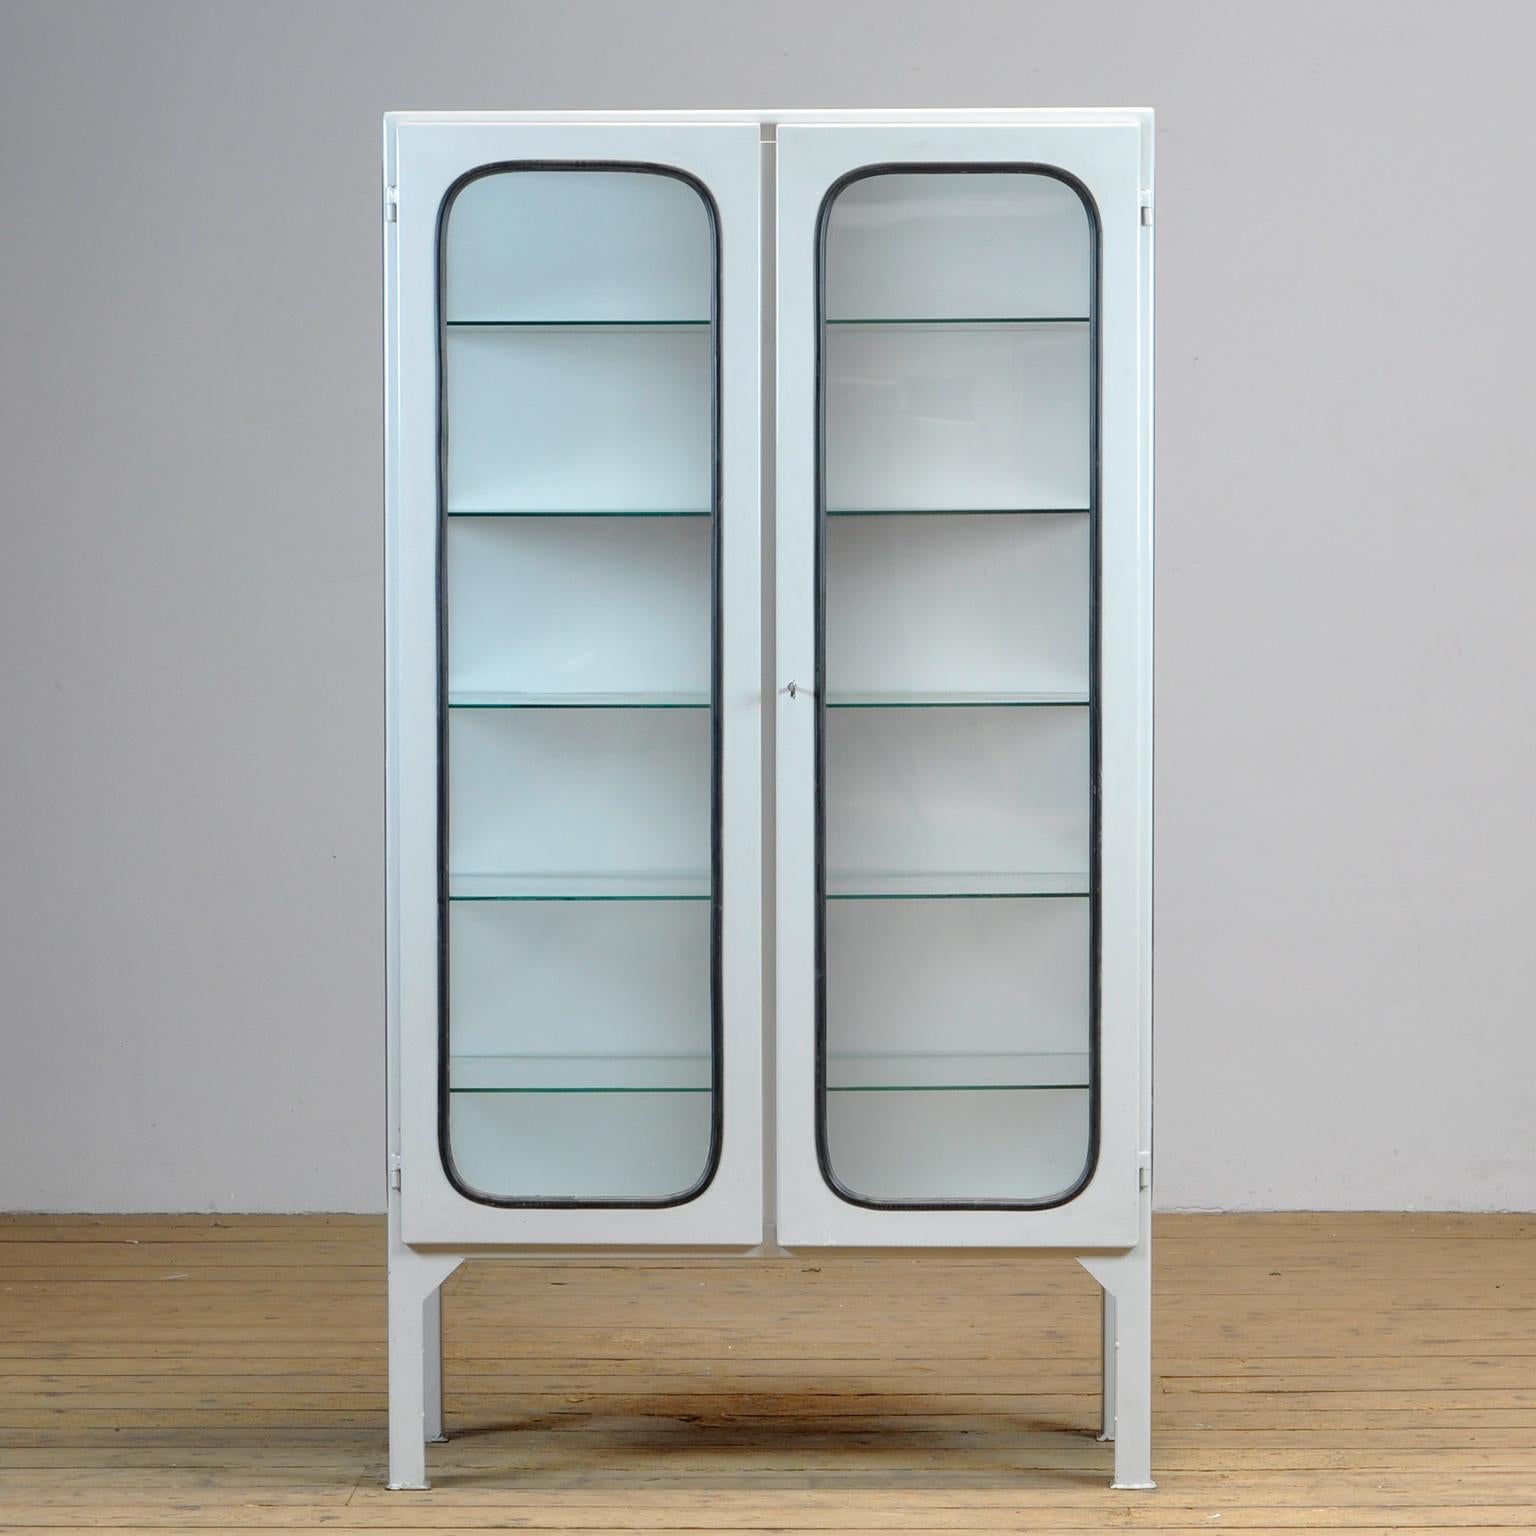 This medical cabinet was designed in the 1970s and was produced circa 1975 in hungary. It is made from iron and glass, and the glass is held by a black rubber strip. The cabinet features five adjustable glass shelves and a functioning lock. 